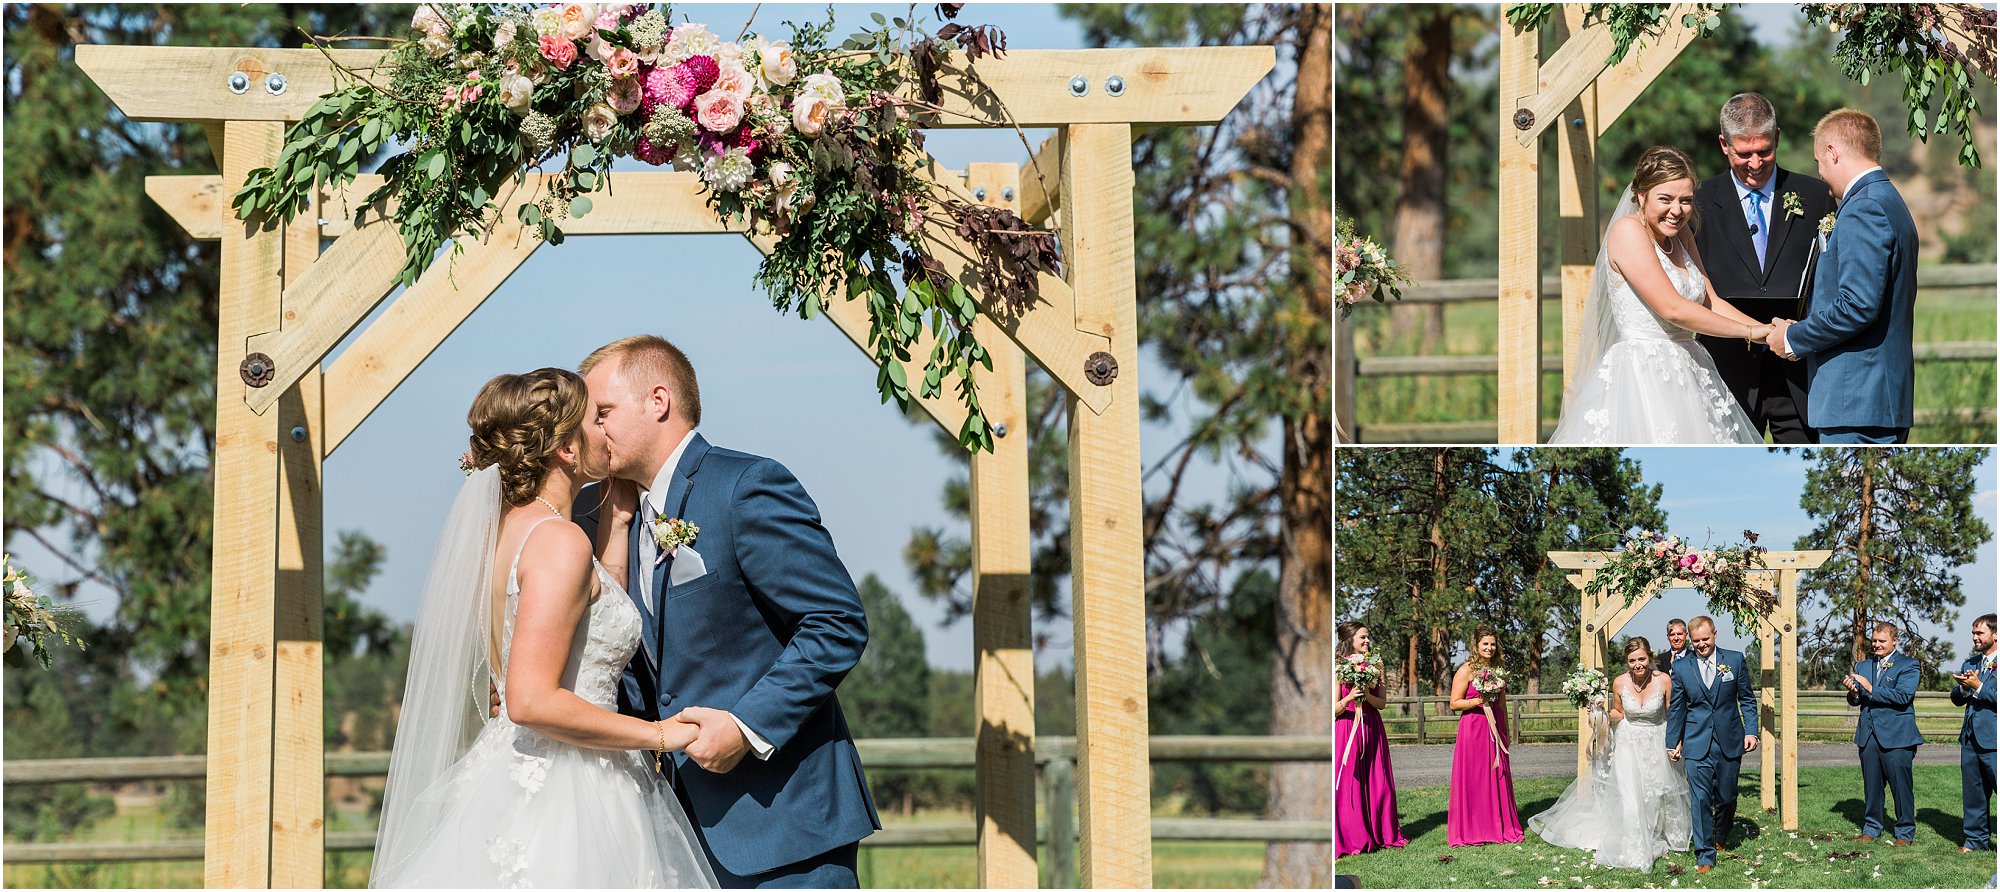 The happy couple is pronounced husband and wife during their outdoor wedding ceremony at Rock Springs Ranch in Bend, OR. | Erica Swantek Photography